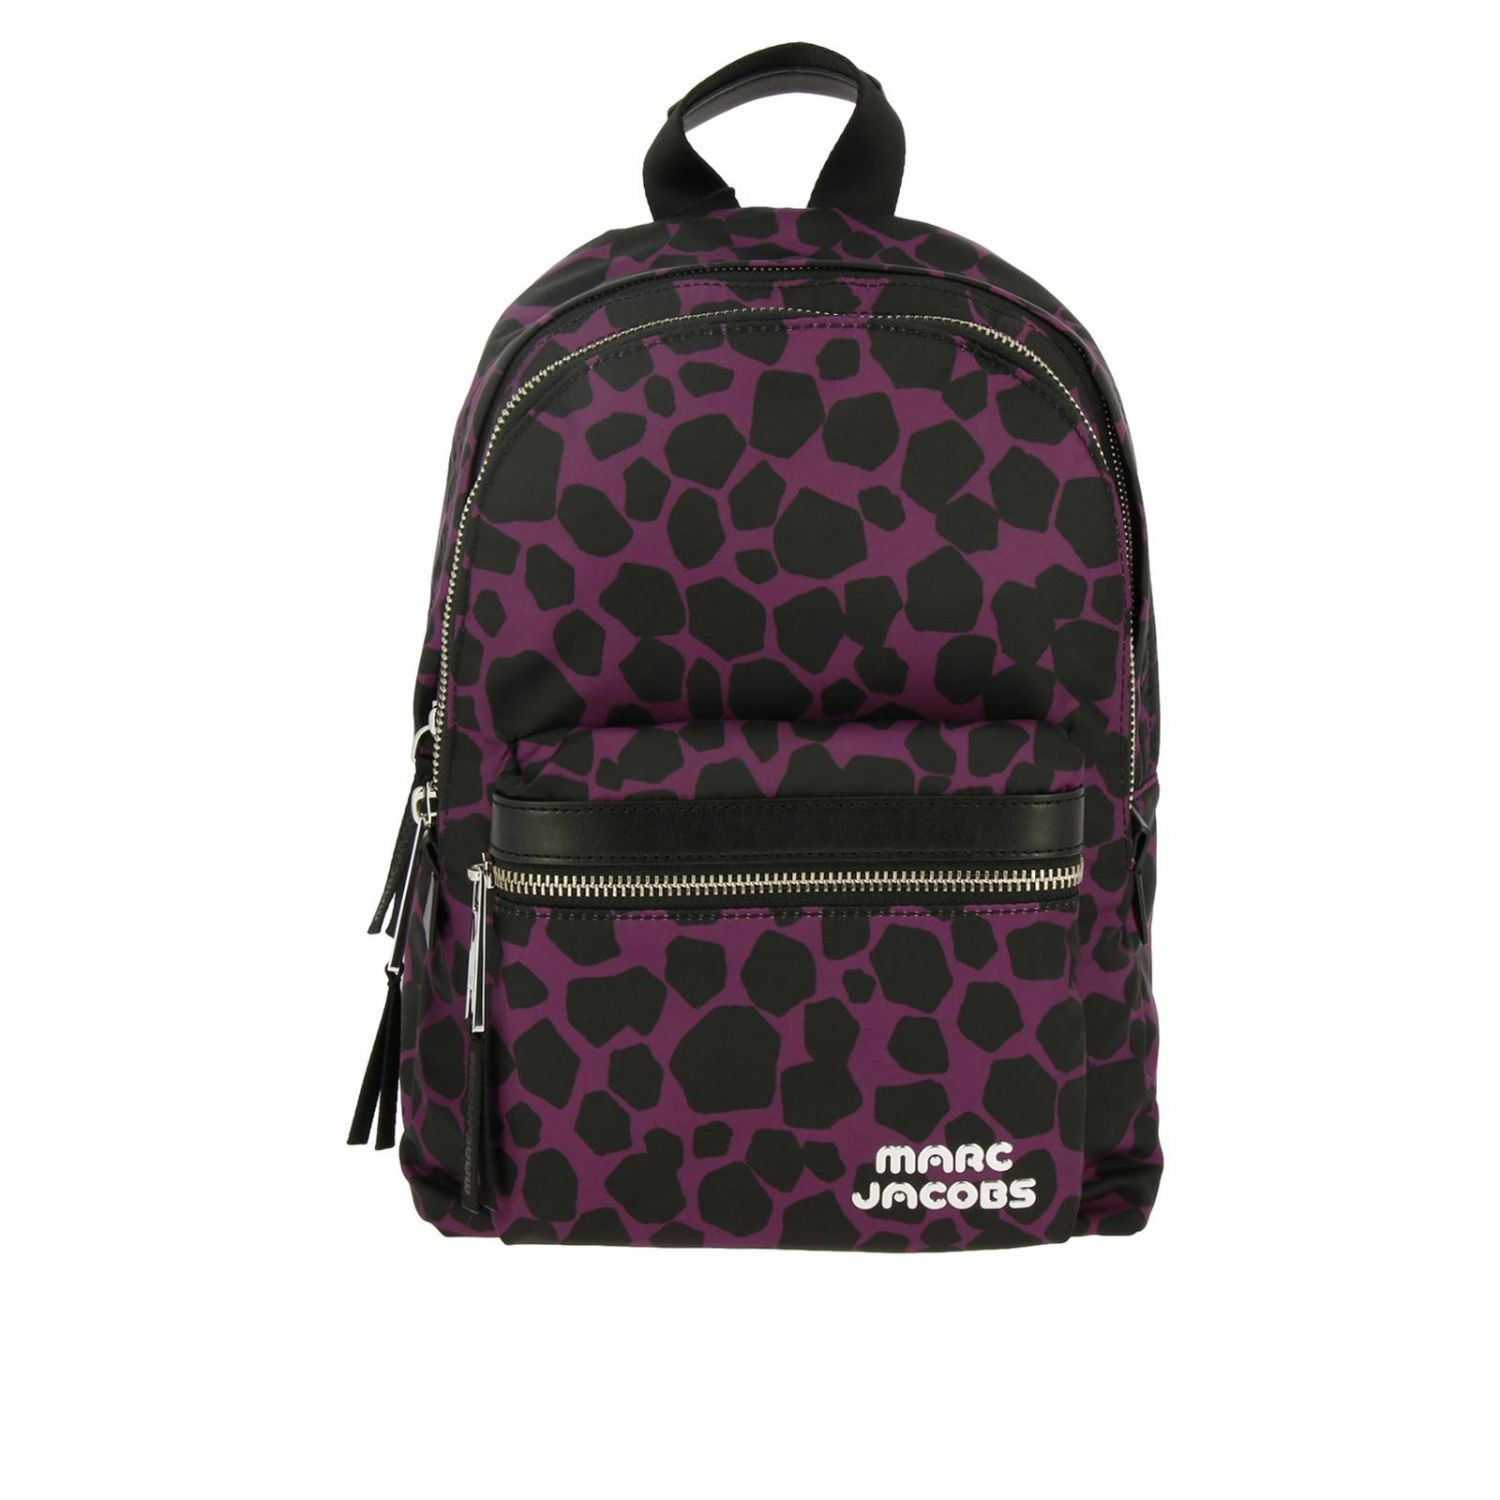 Marc Jacobs Outlet: Backpack women - Multicolor | Backpack Marc Jacobs ...